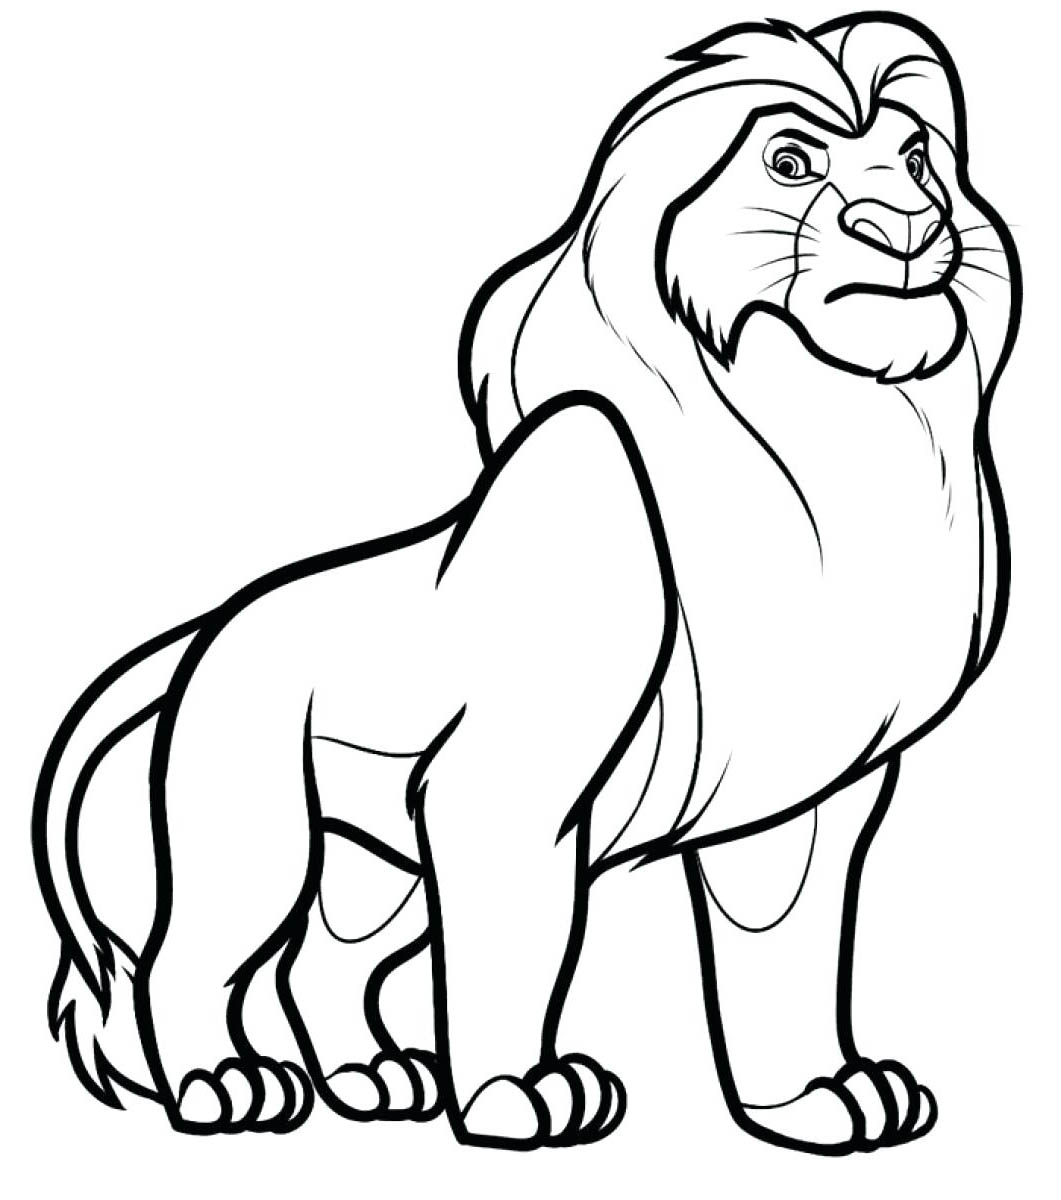 lion coloring page for toddler bubakidscom - free cute lion coloring ...